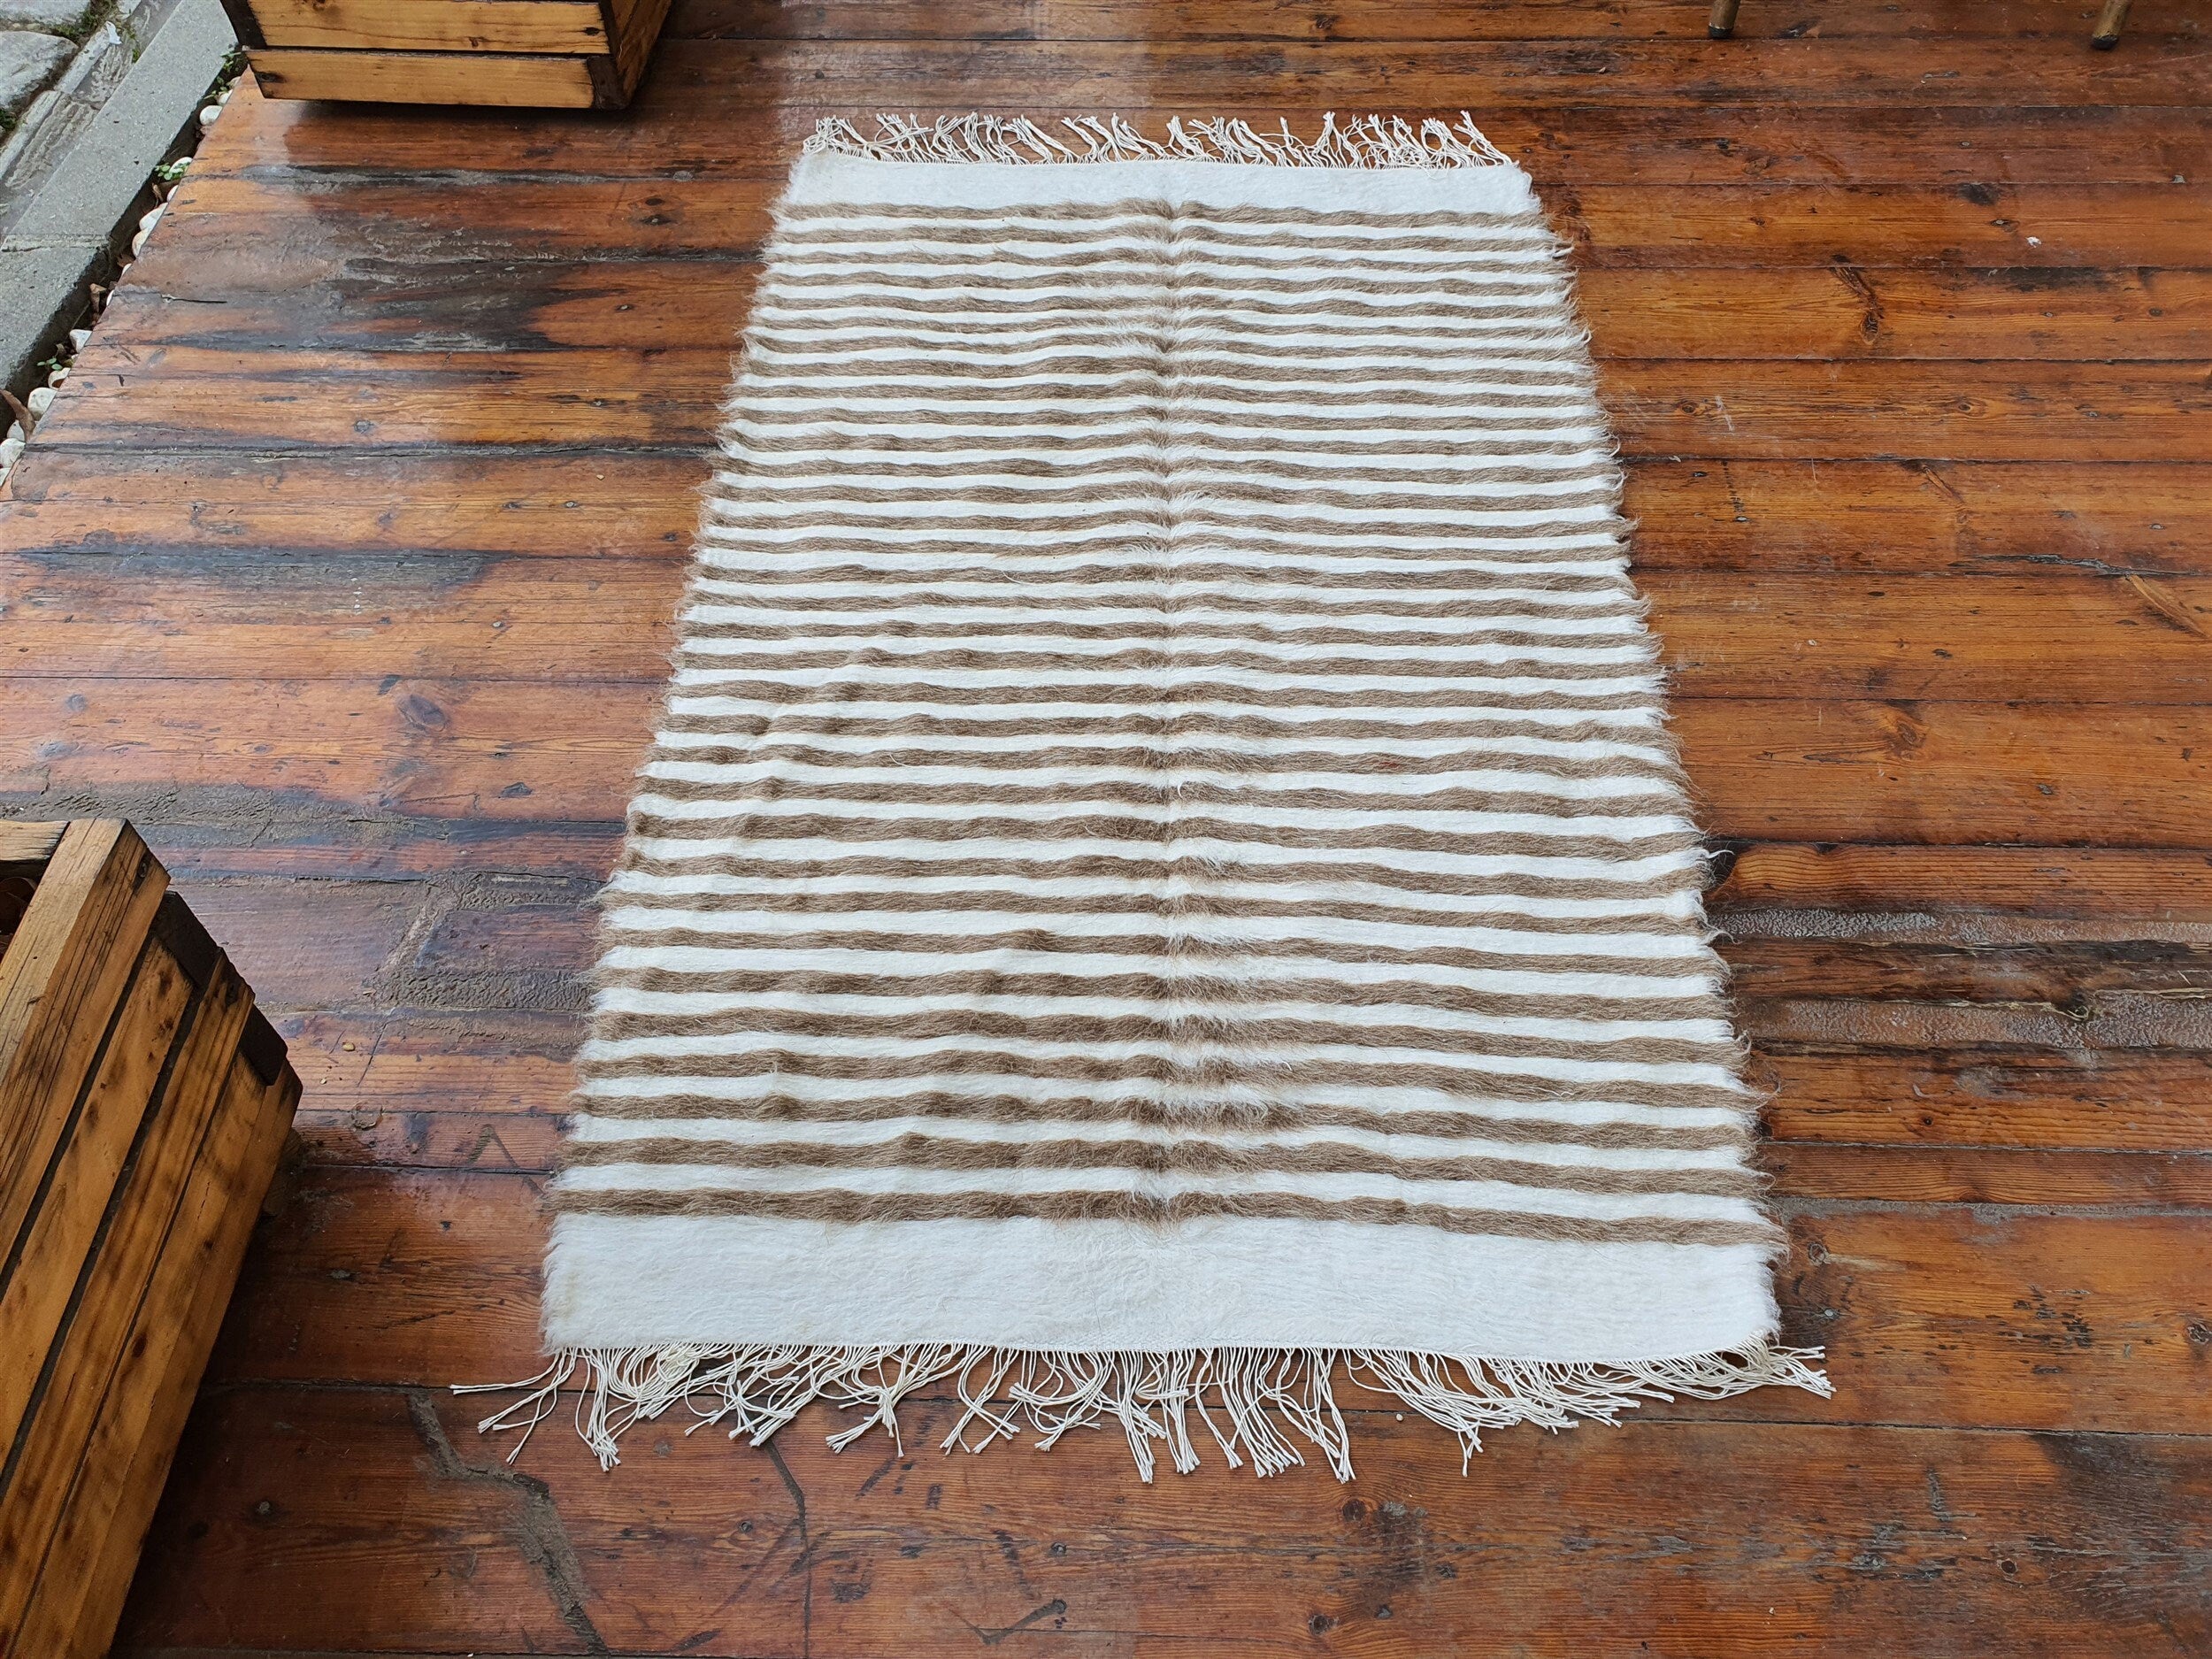 Siirt Angora Vintage Turkish Rug, 4 ft 2 in x 2 ft 6 in Brown and White Striped Tulu Turkish Mat